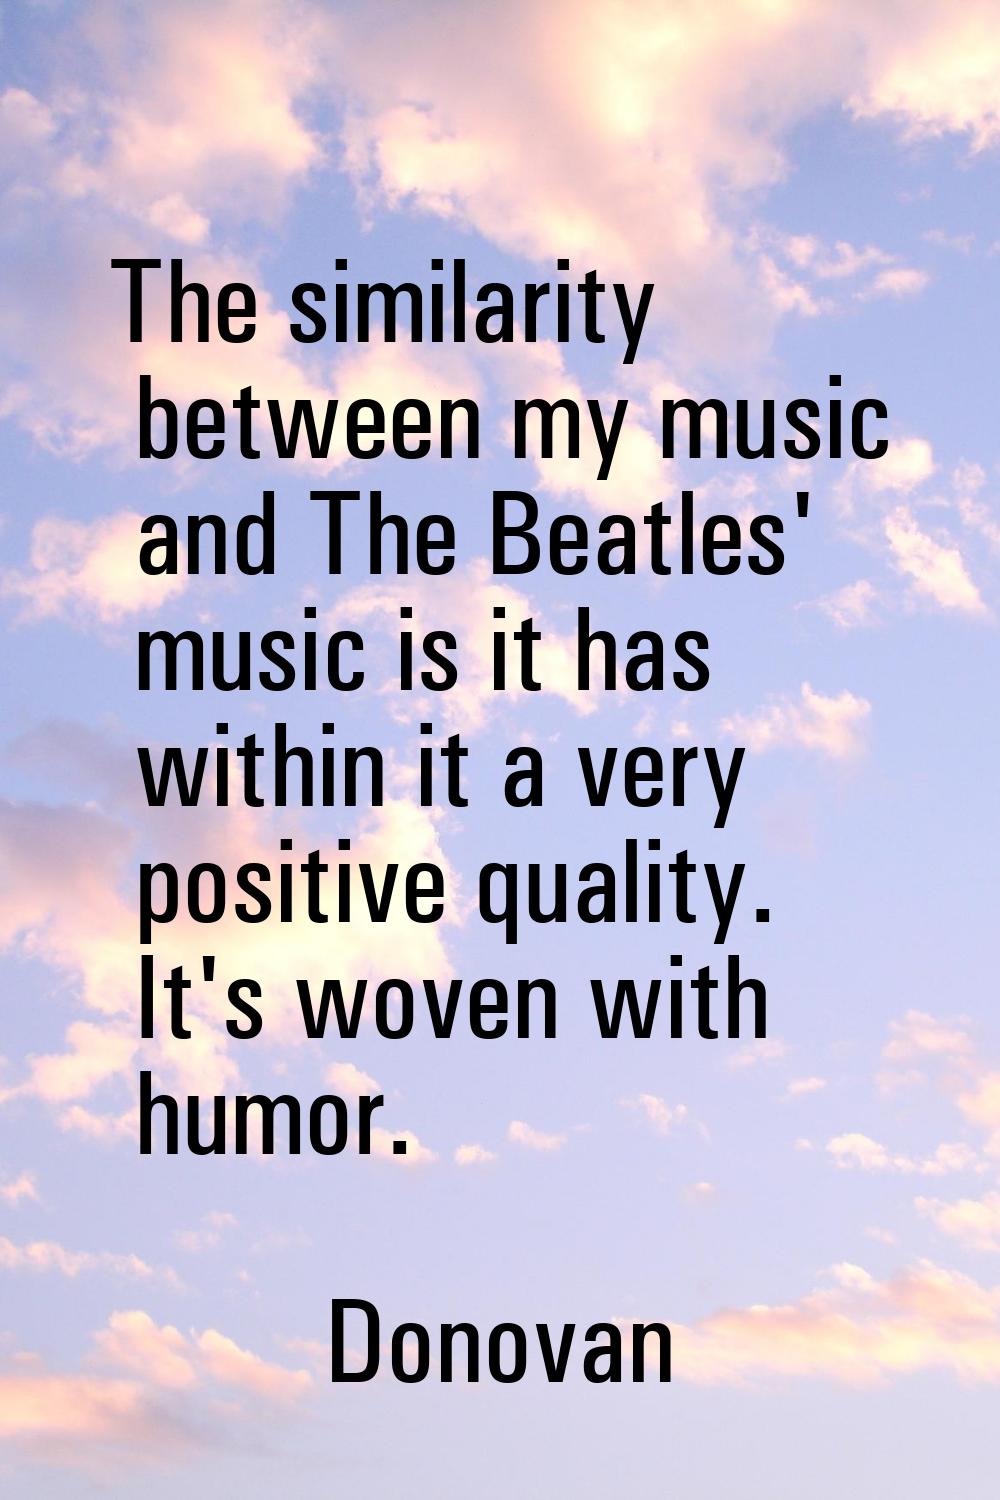 The similarity between my music and The Beatles' music is it has within it a very positive quality.